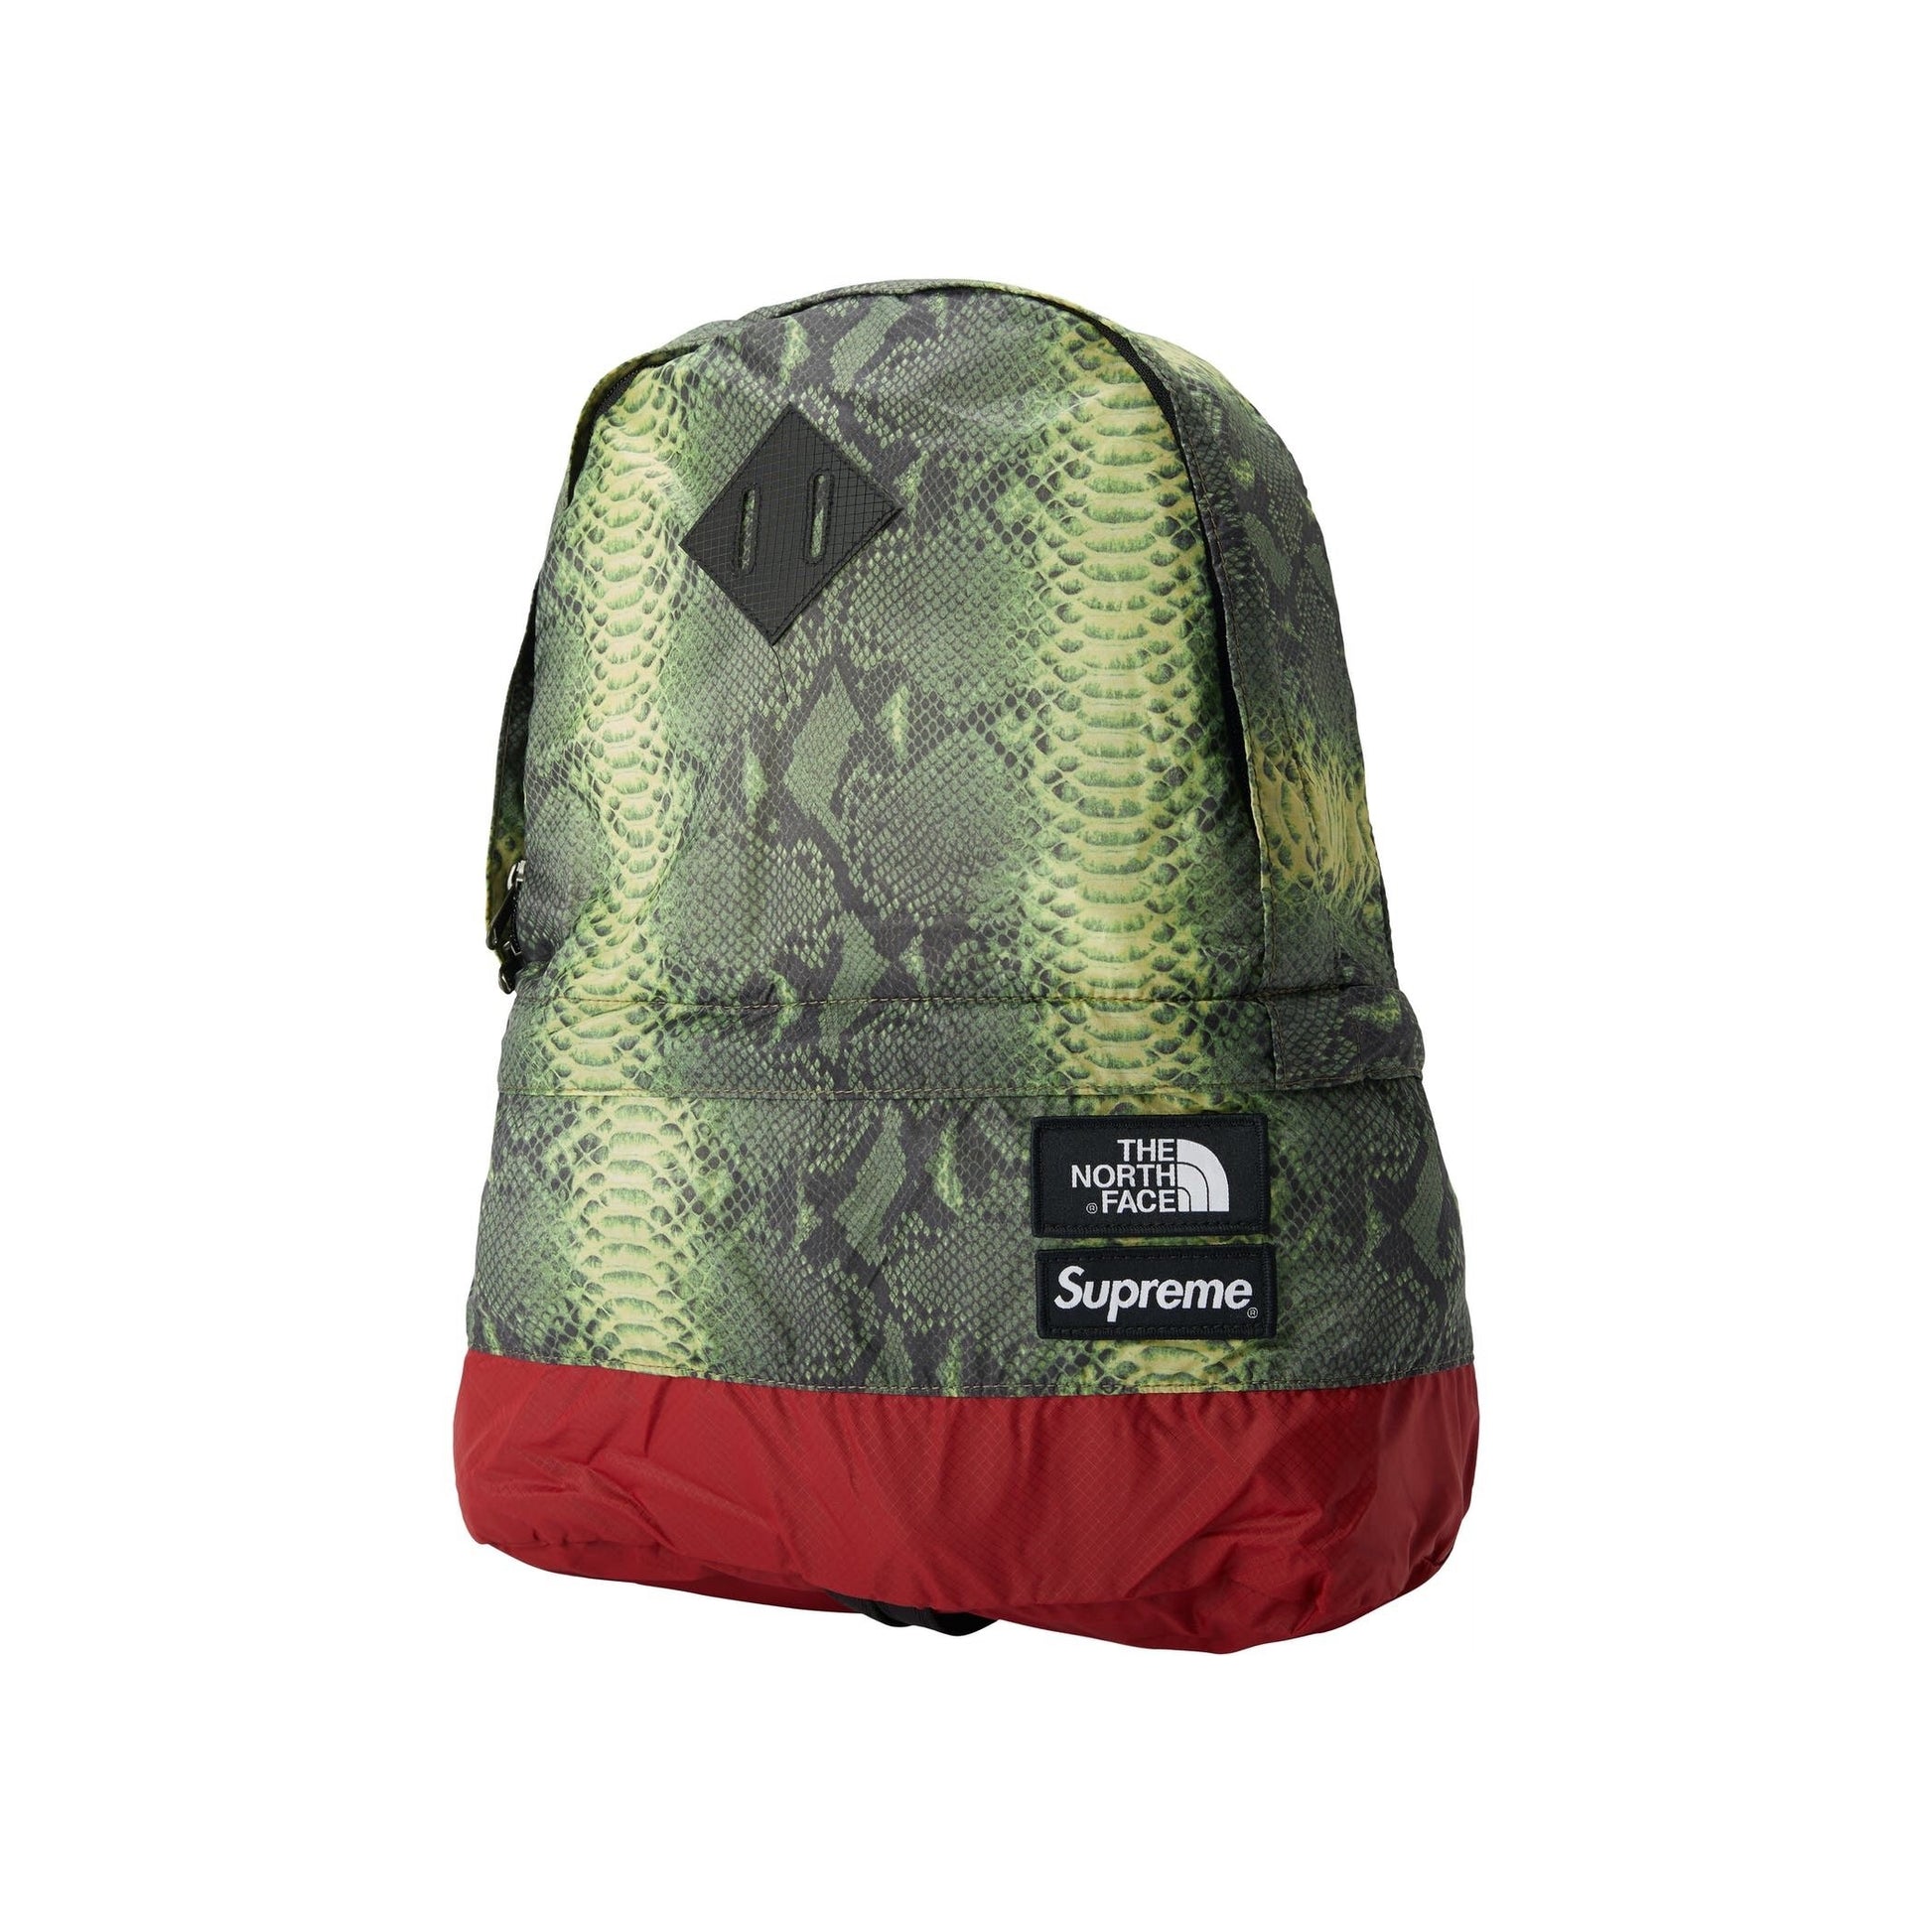 Supreme x the north face snakeskin lightweight day pack - green - Centrall Online